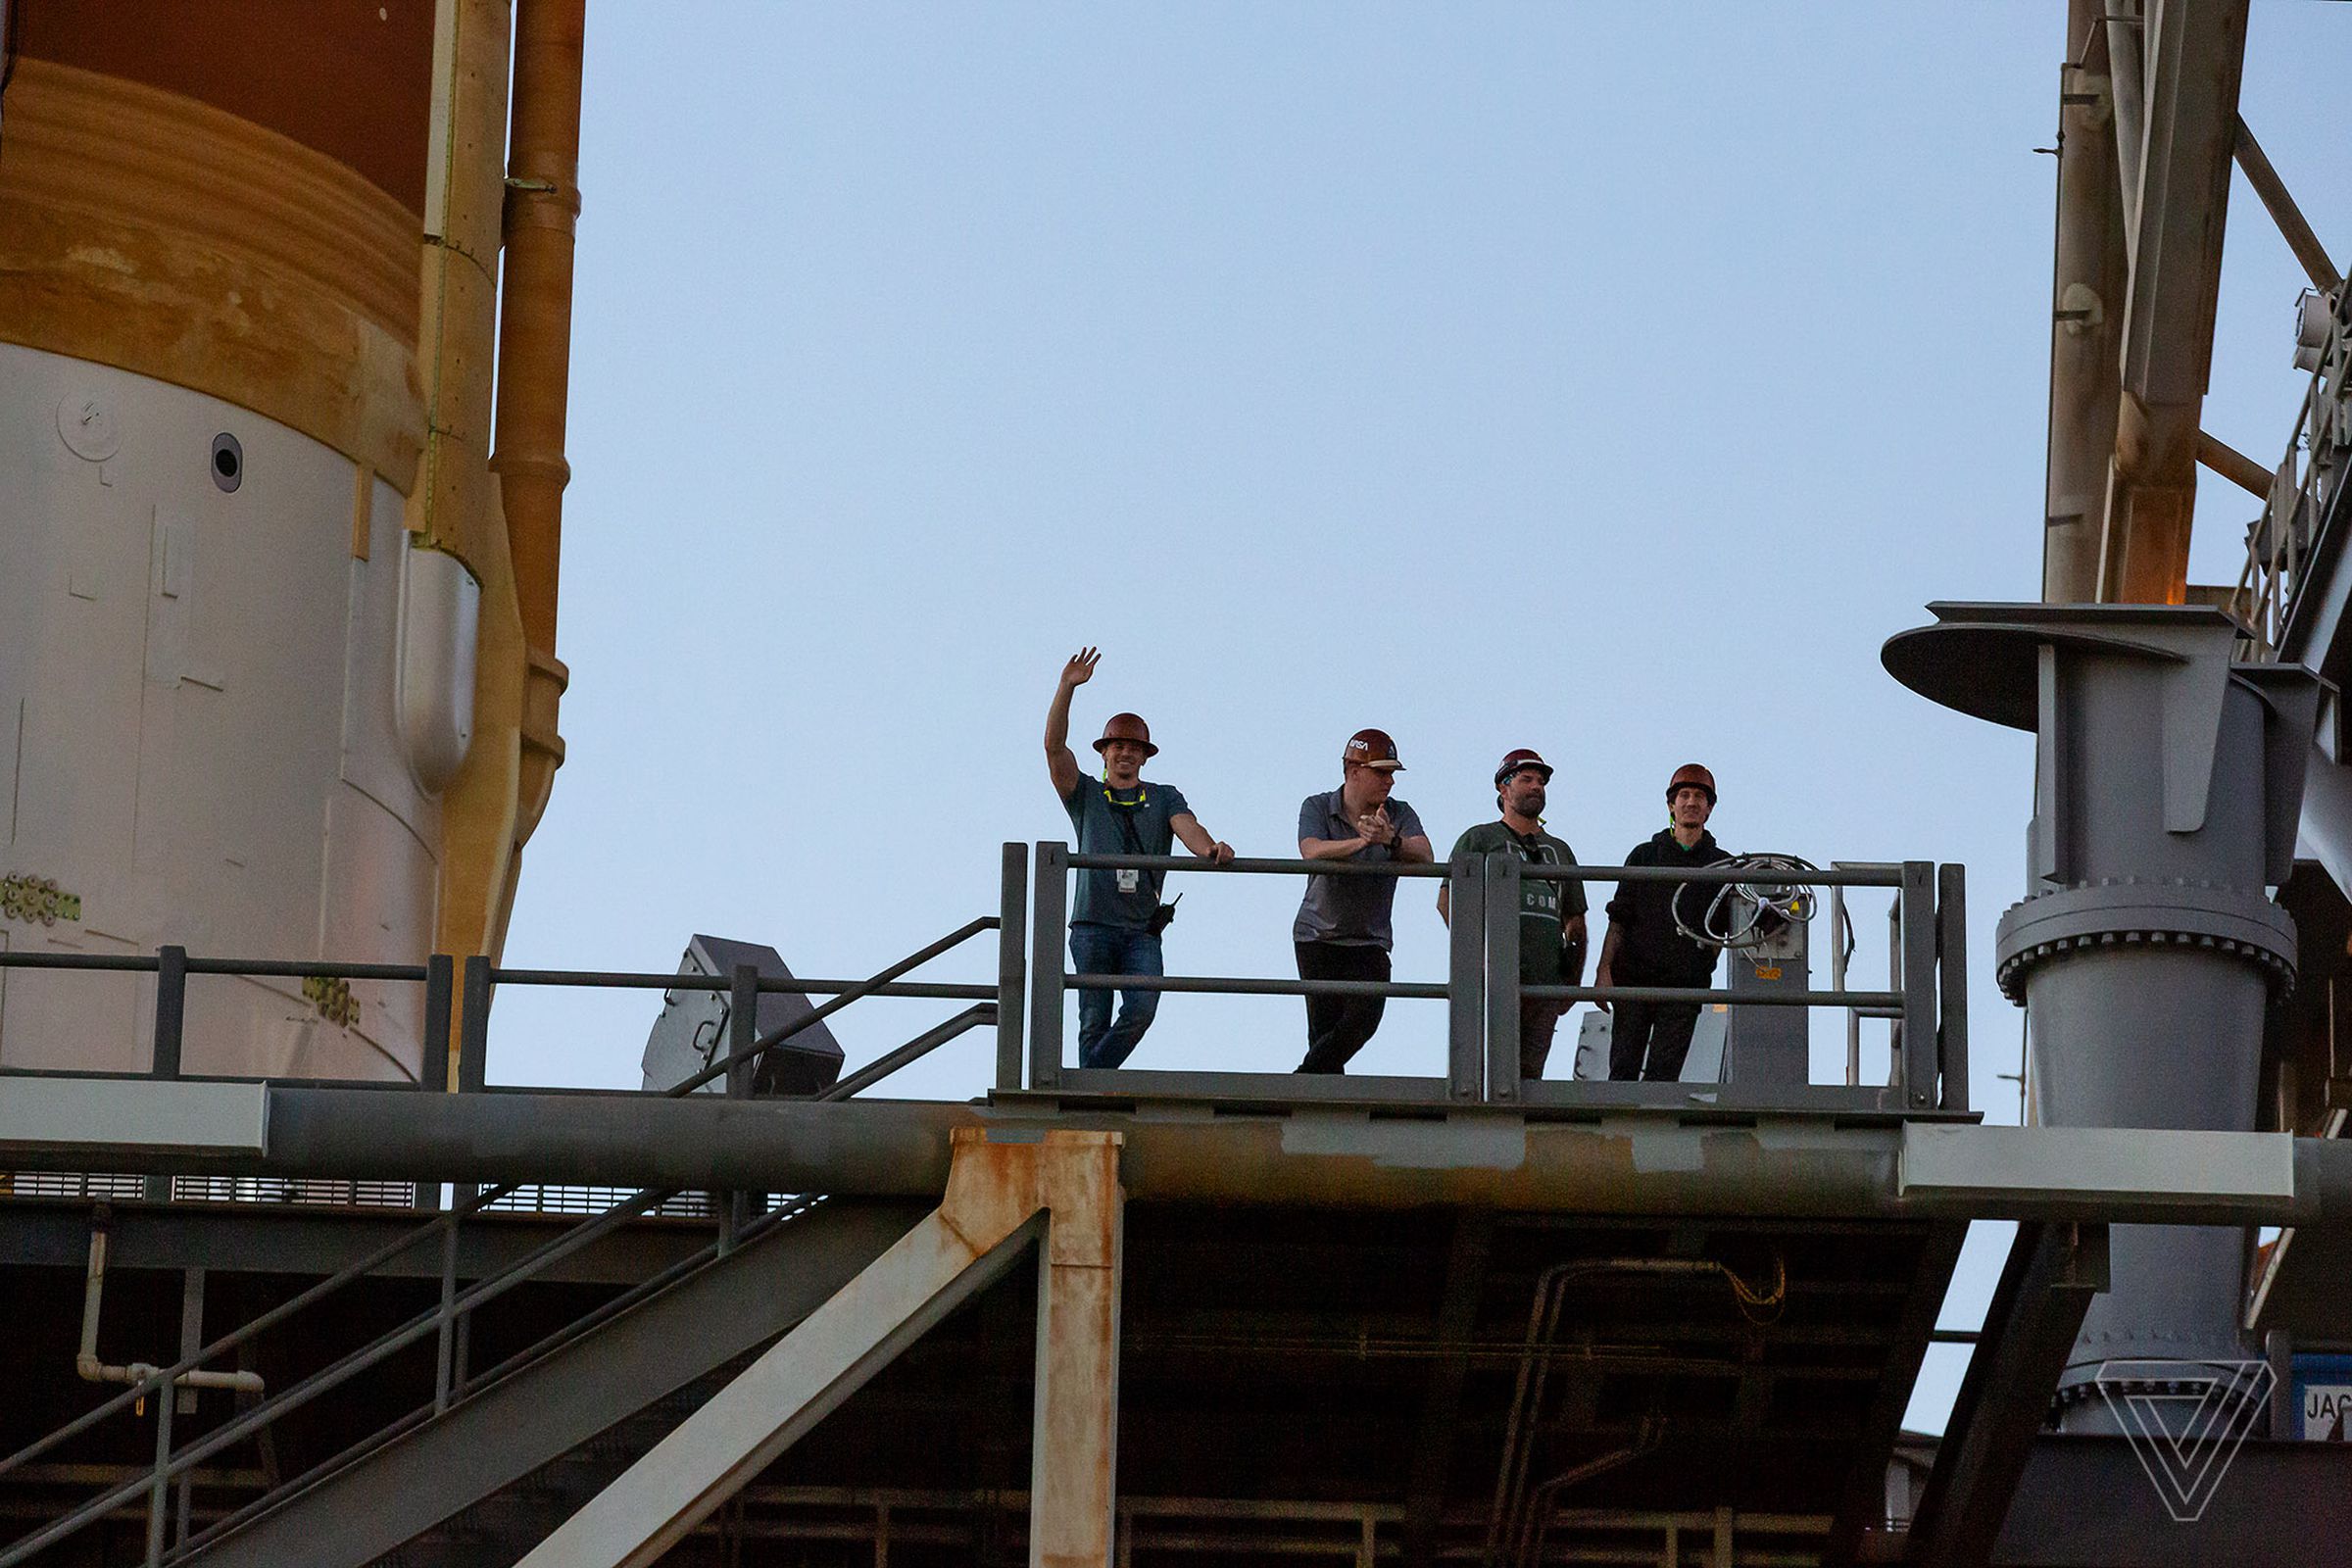 Workers on the mobile launch platform wave to onlookers.